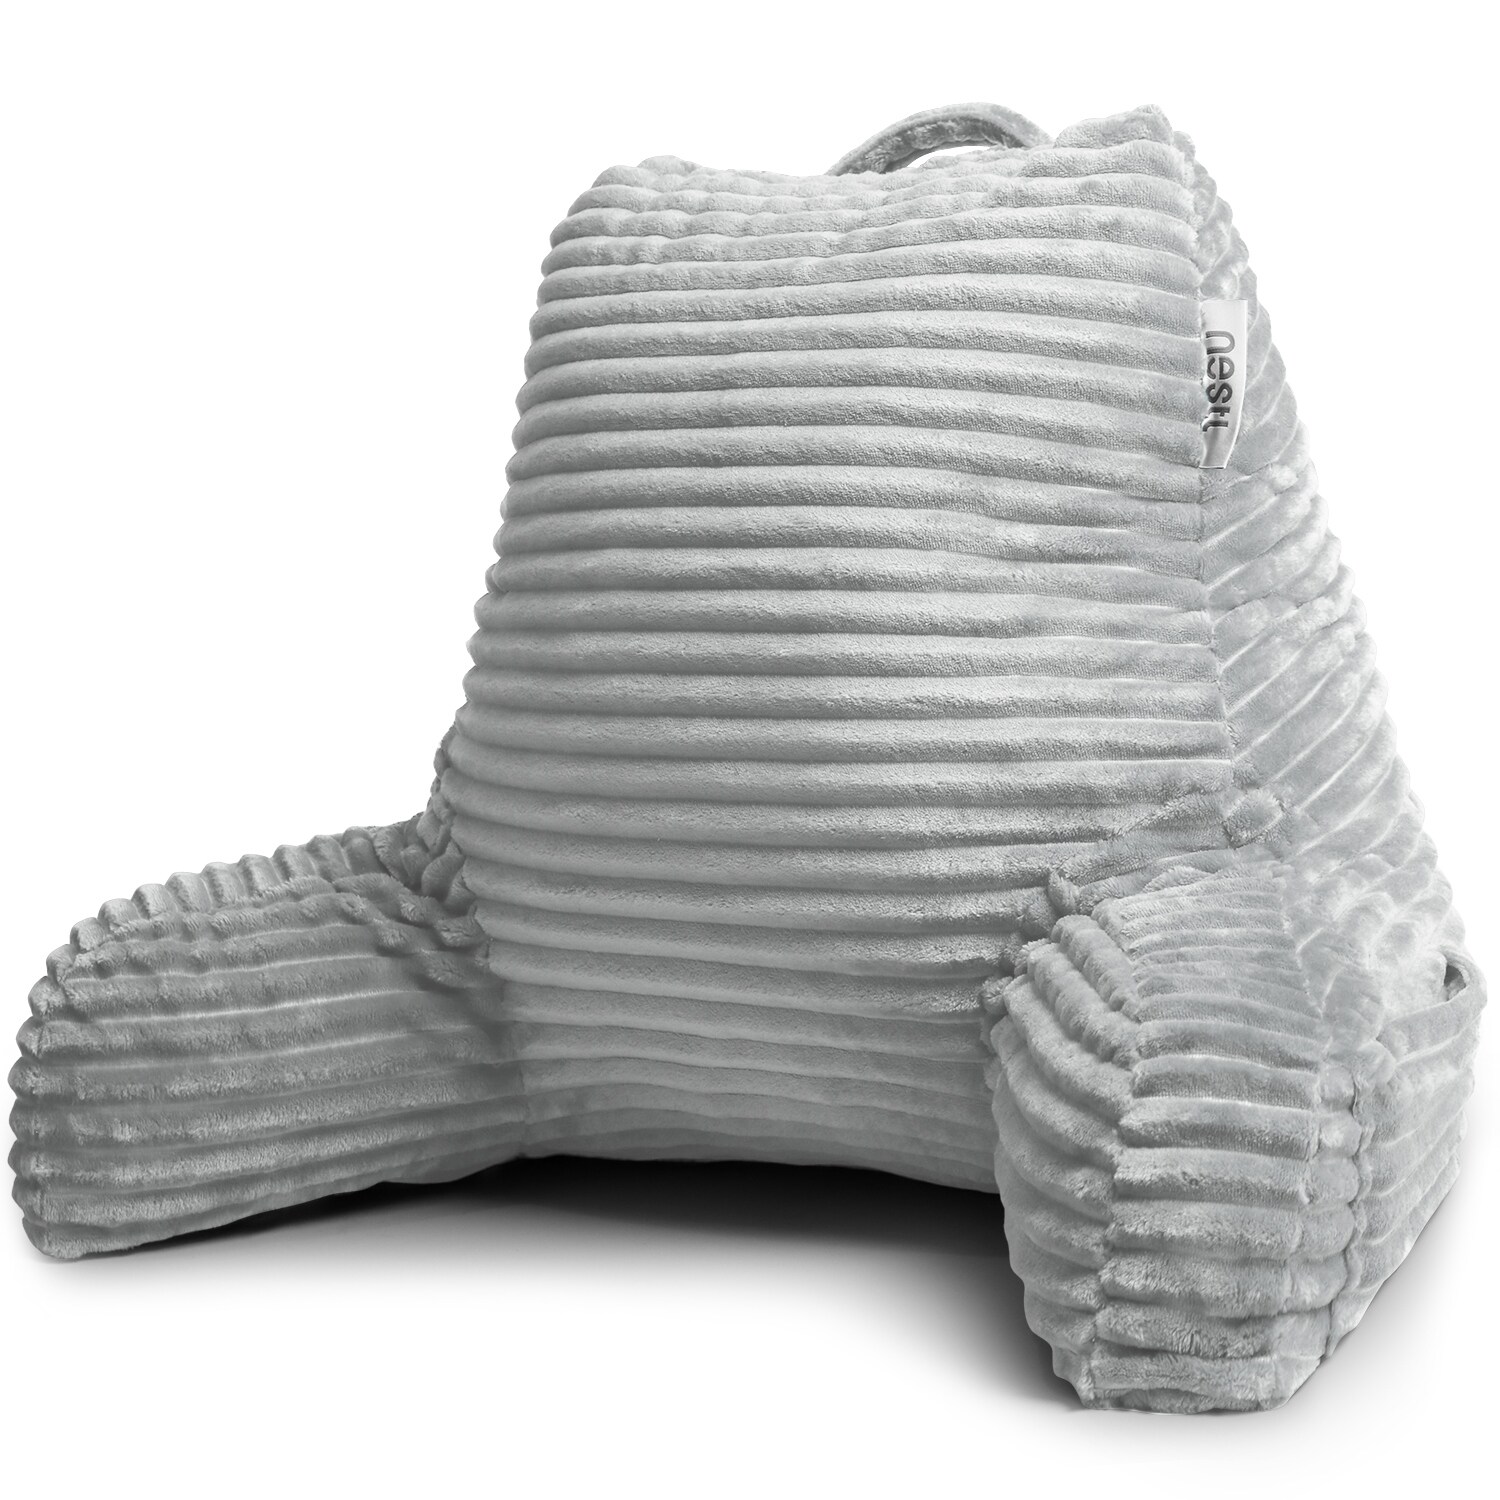 https://ak1.ostkcdn.com/images/products/is/images/direct/86f54cc4c7be9d192a47d45223260547ba90b4ee/Nestl-Cut-Plush-Striped-Reading-Pillow---Back-Support-Shredded-Memory-Foam-Bed-Rest-Pillow-with-Arms.jpg